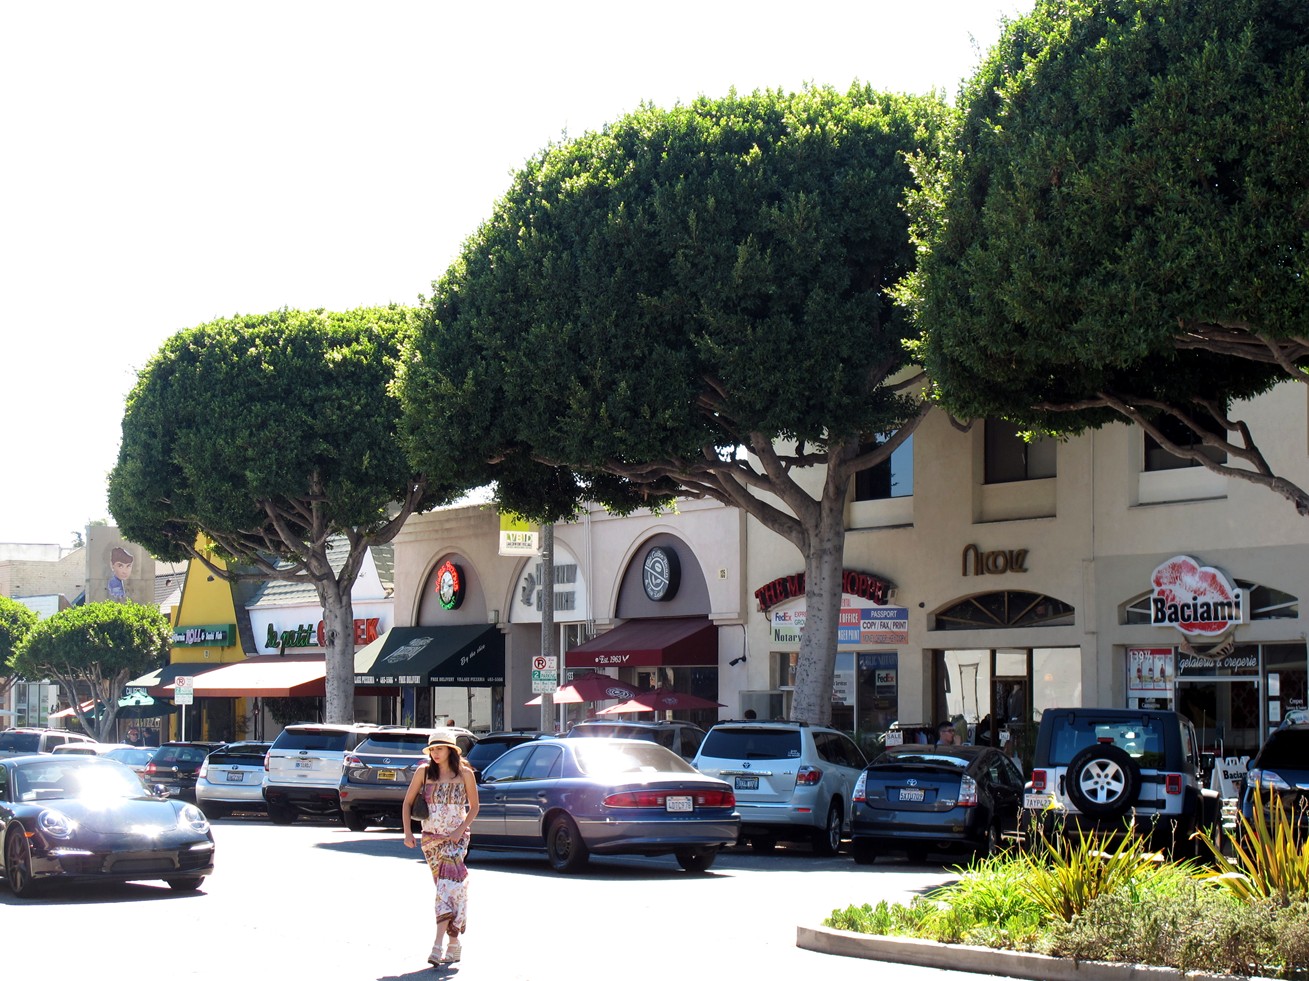 LARCHMONT VILLAGE: OLD FASHIONED TOWN IN THE MIDDLE OF LOS ANGELES